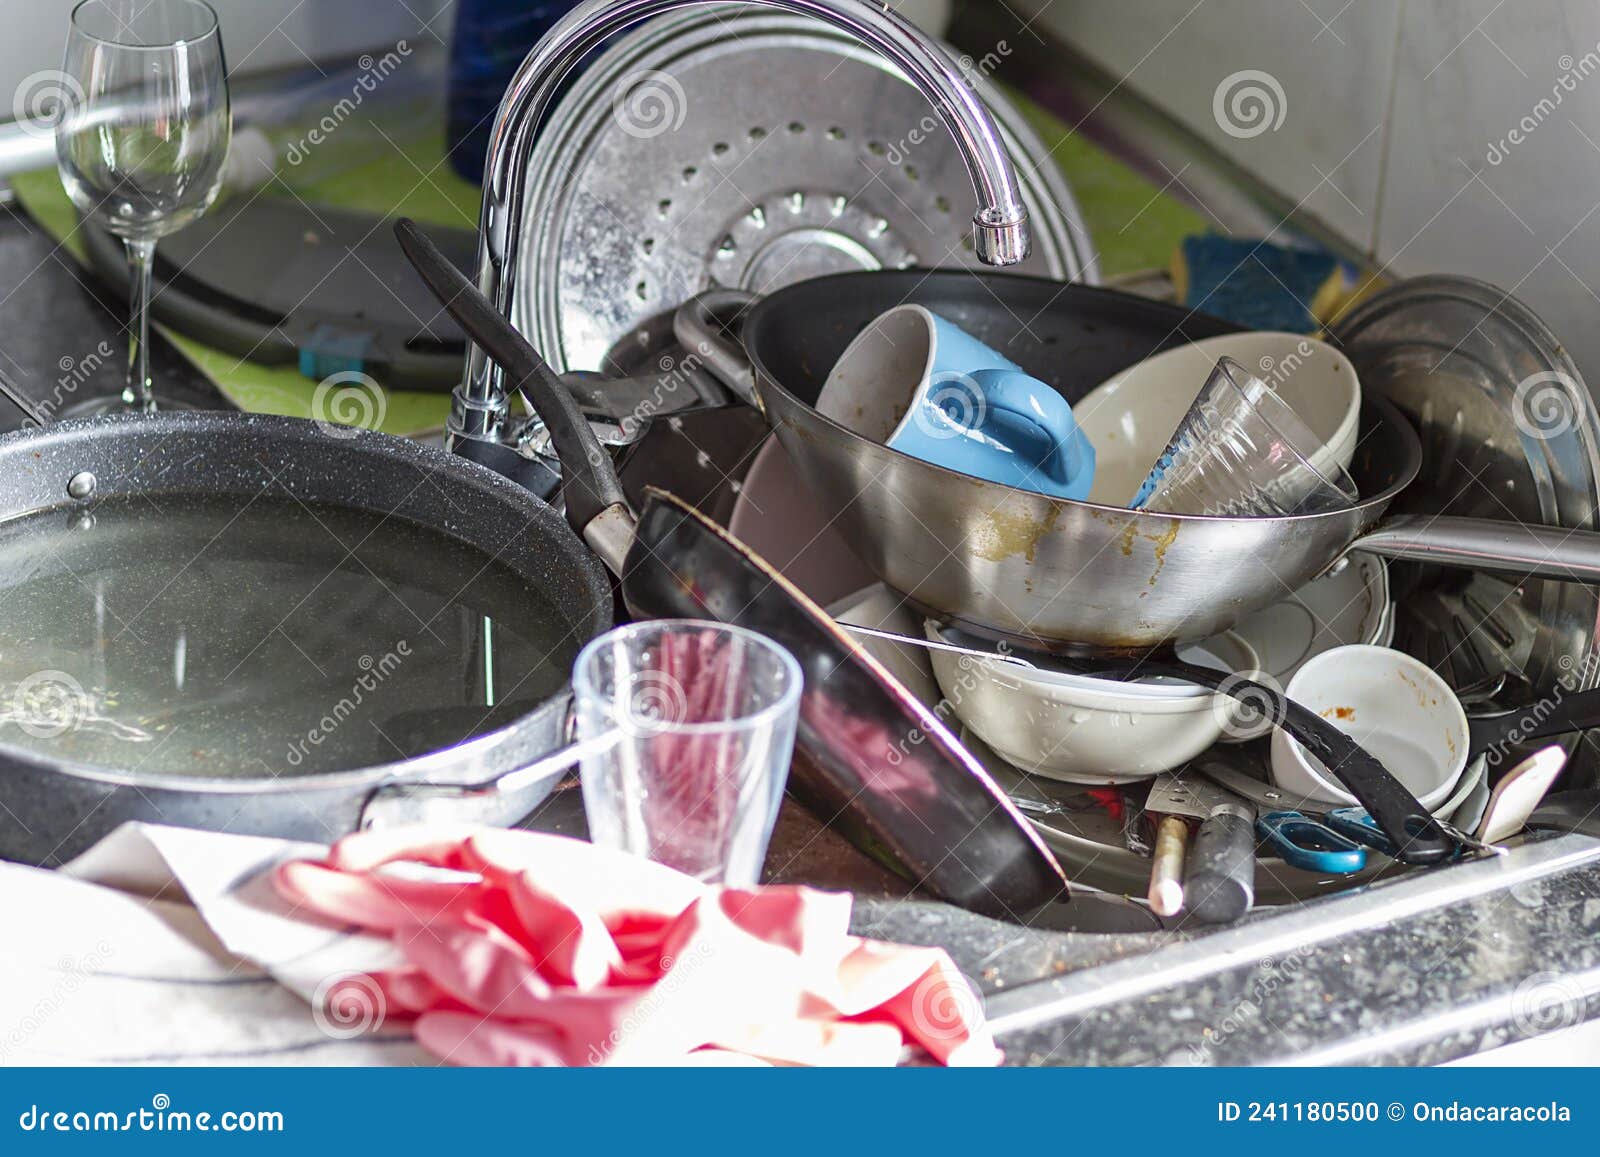 A very dirty kitchen stock photo. Image of kitchenware - 241180500